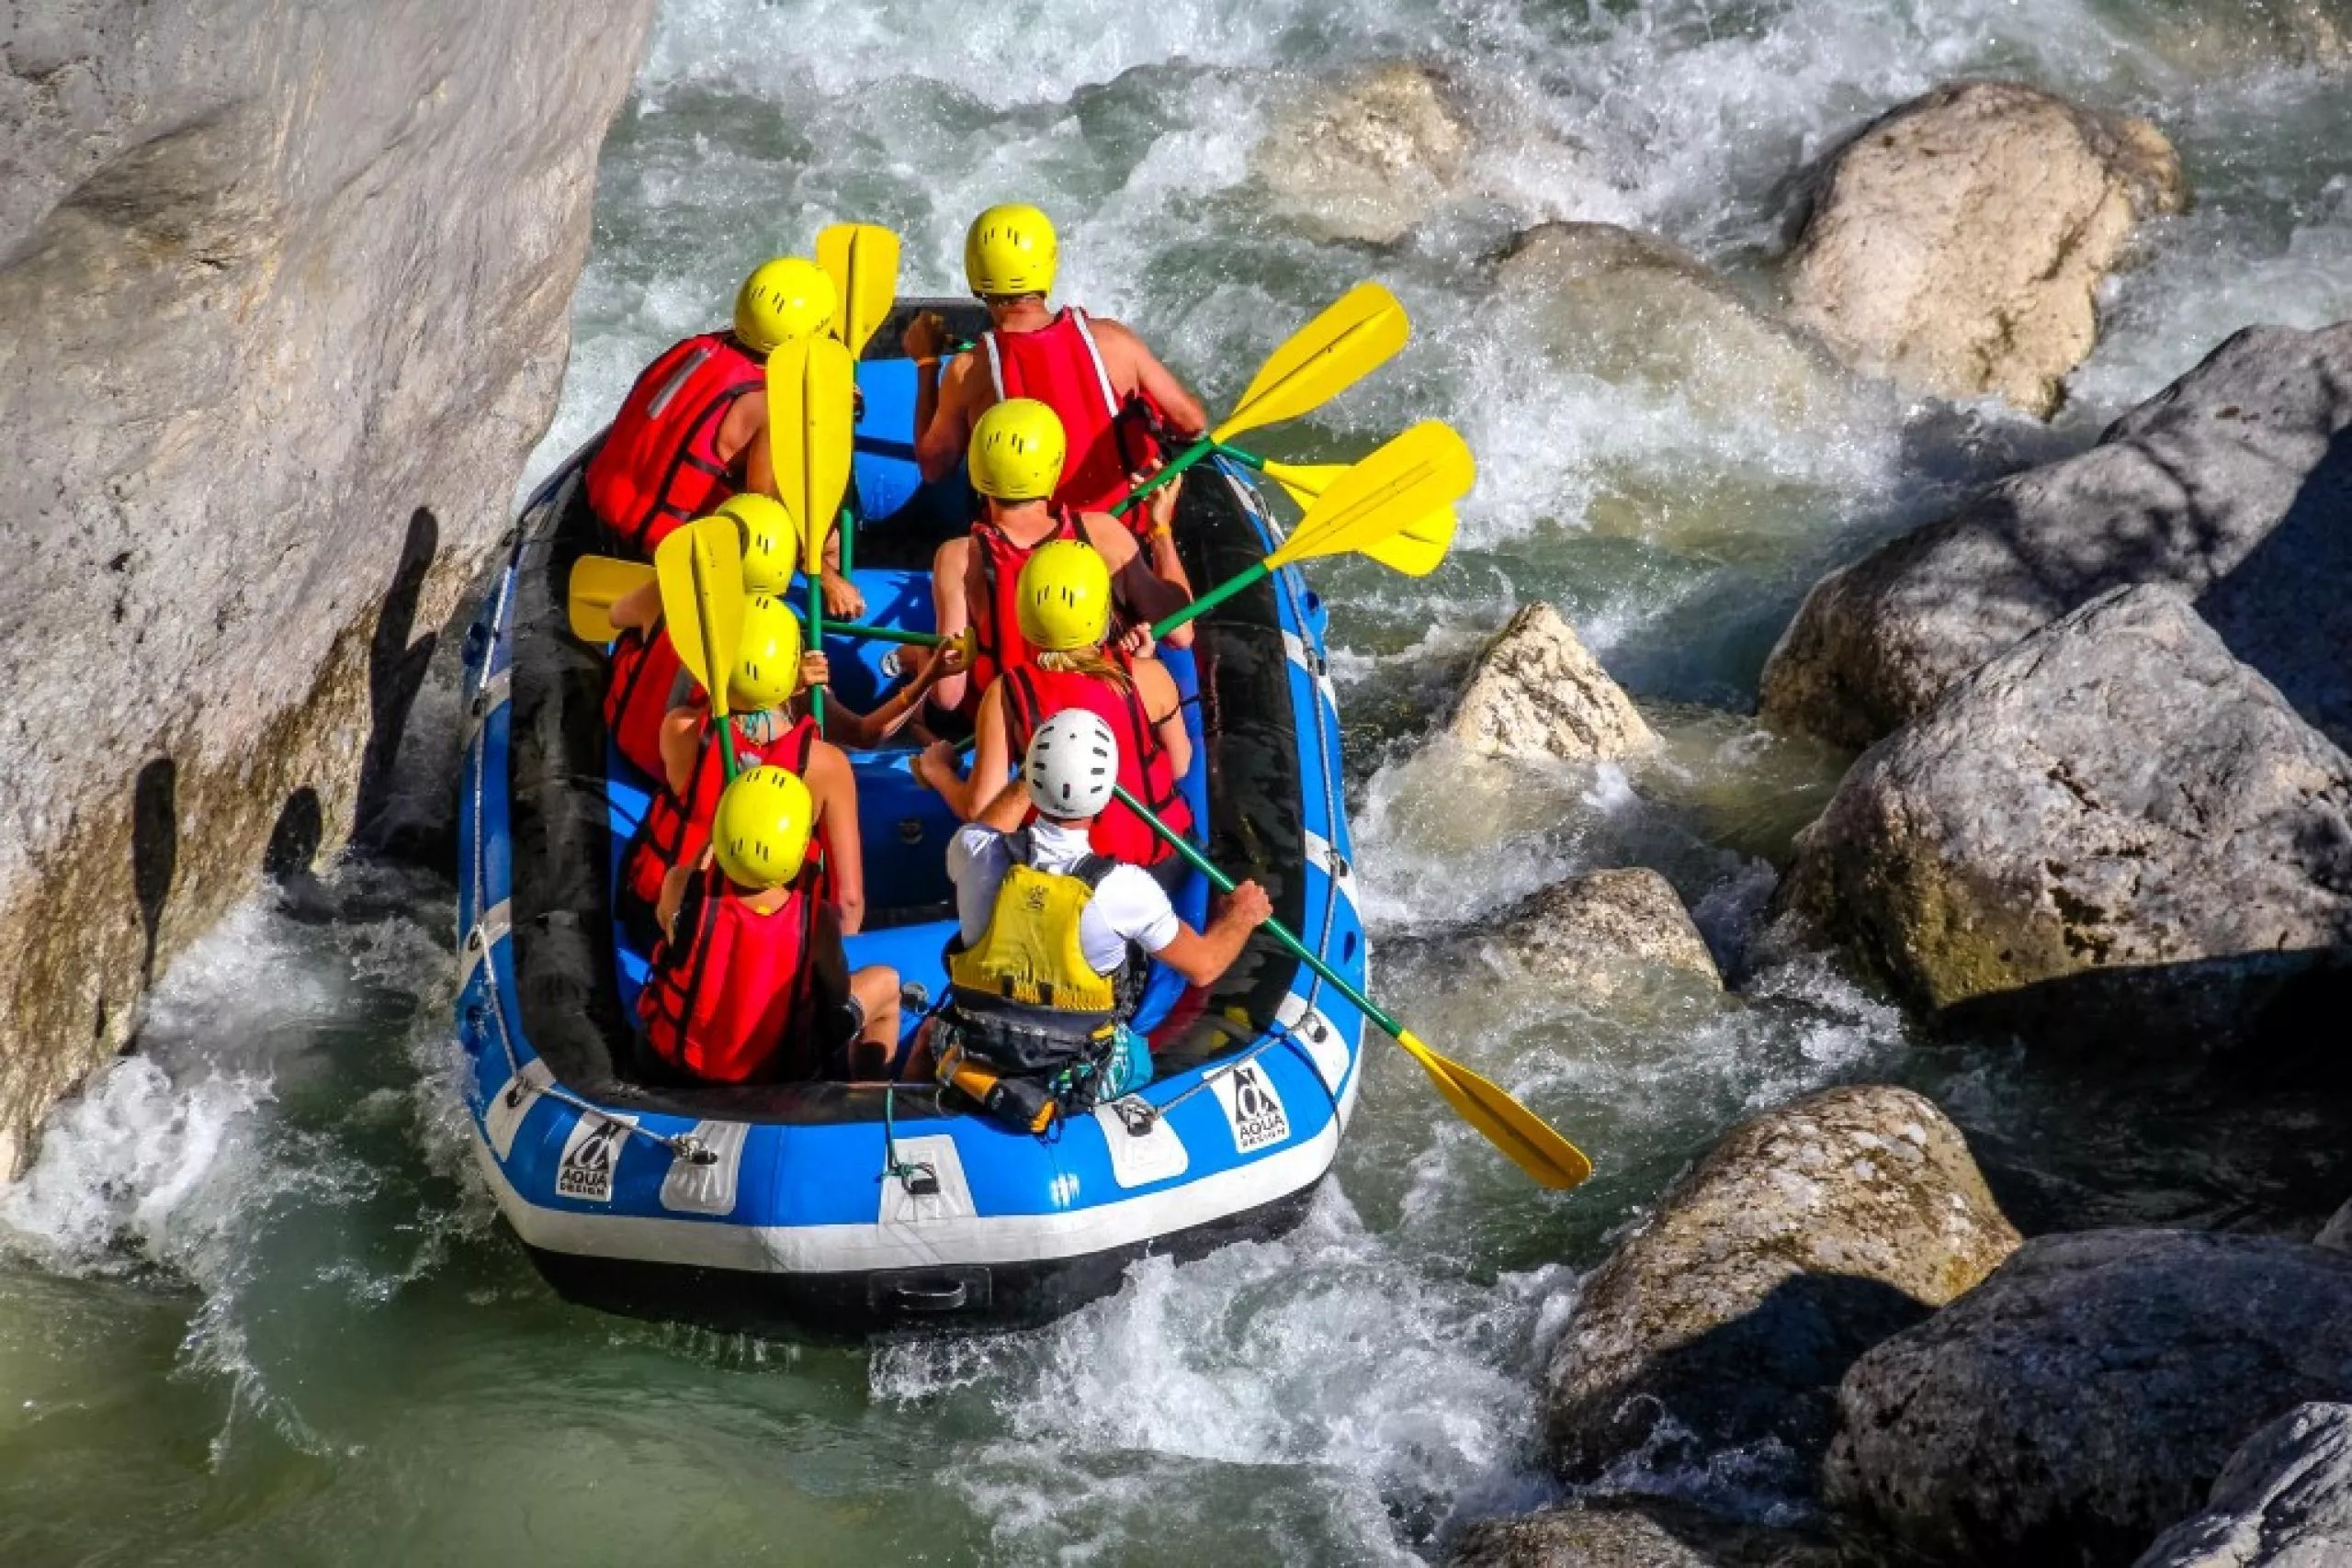 Rafting Base in France, Europe | Rafting - Rated 0.9